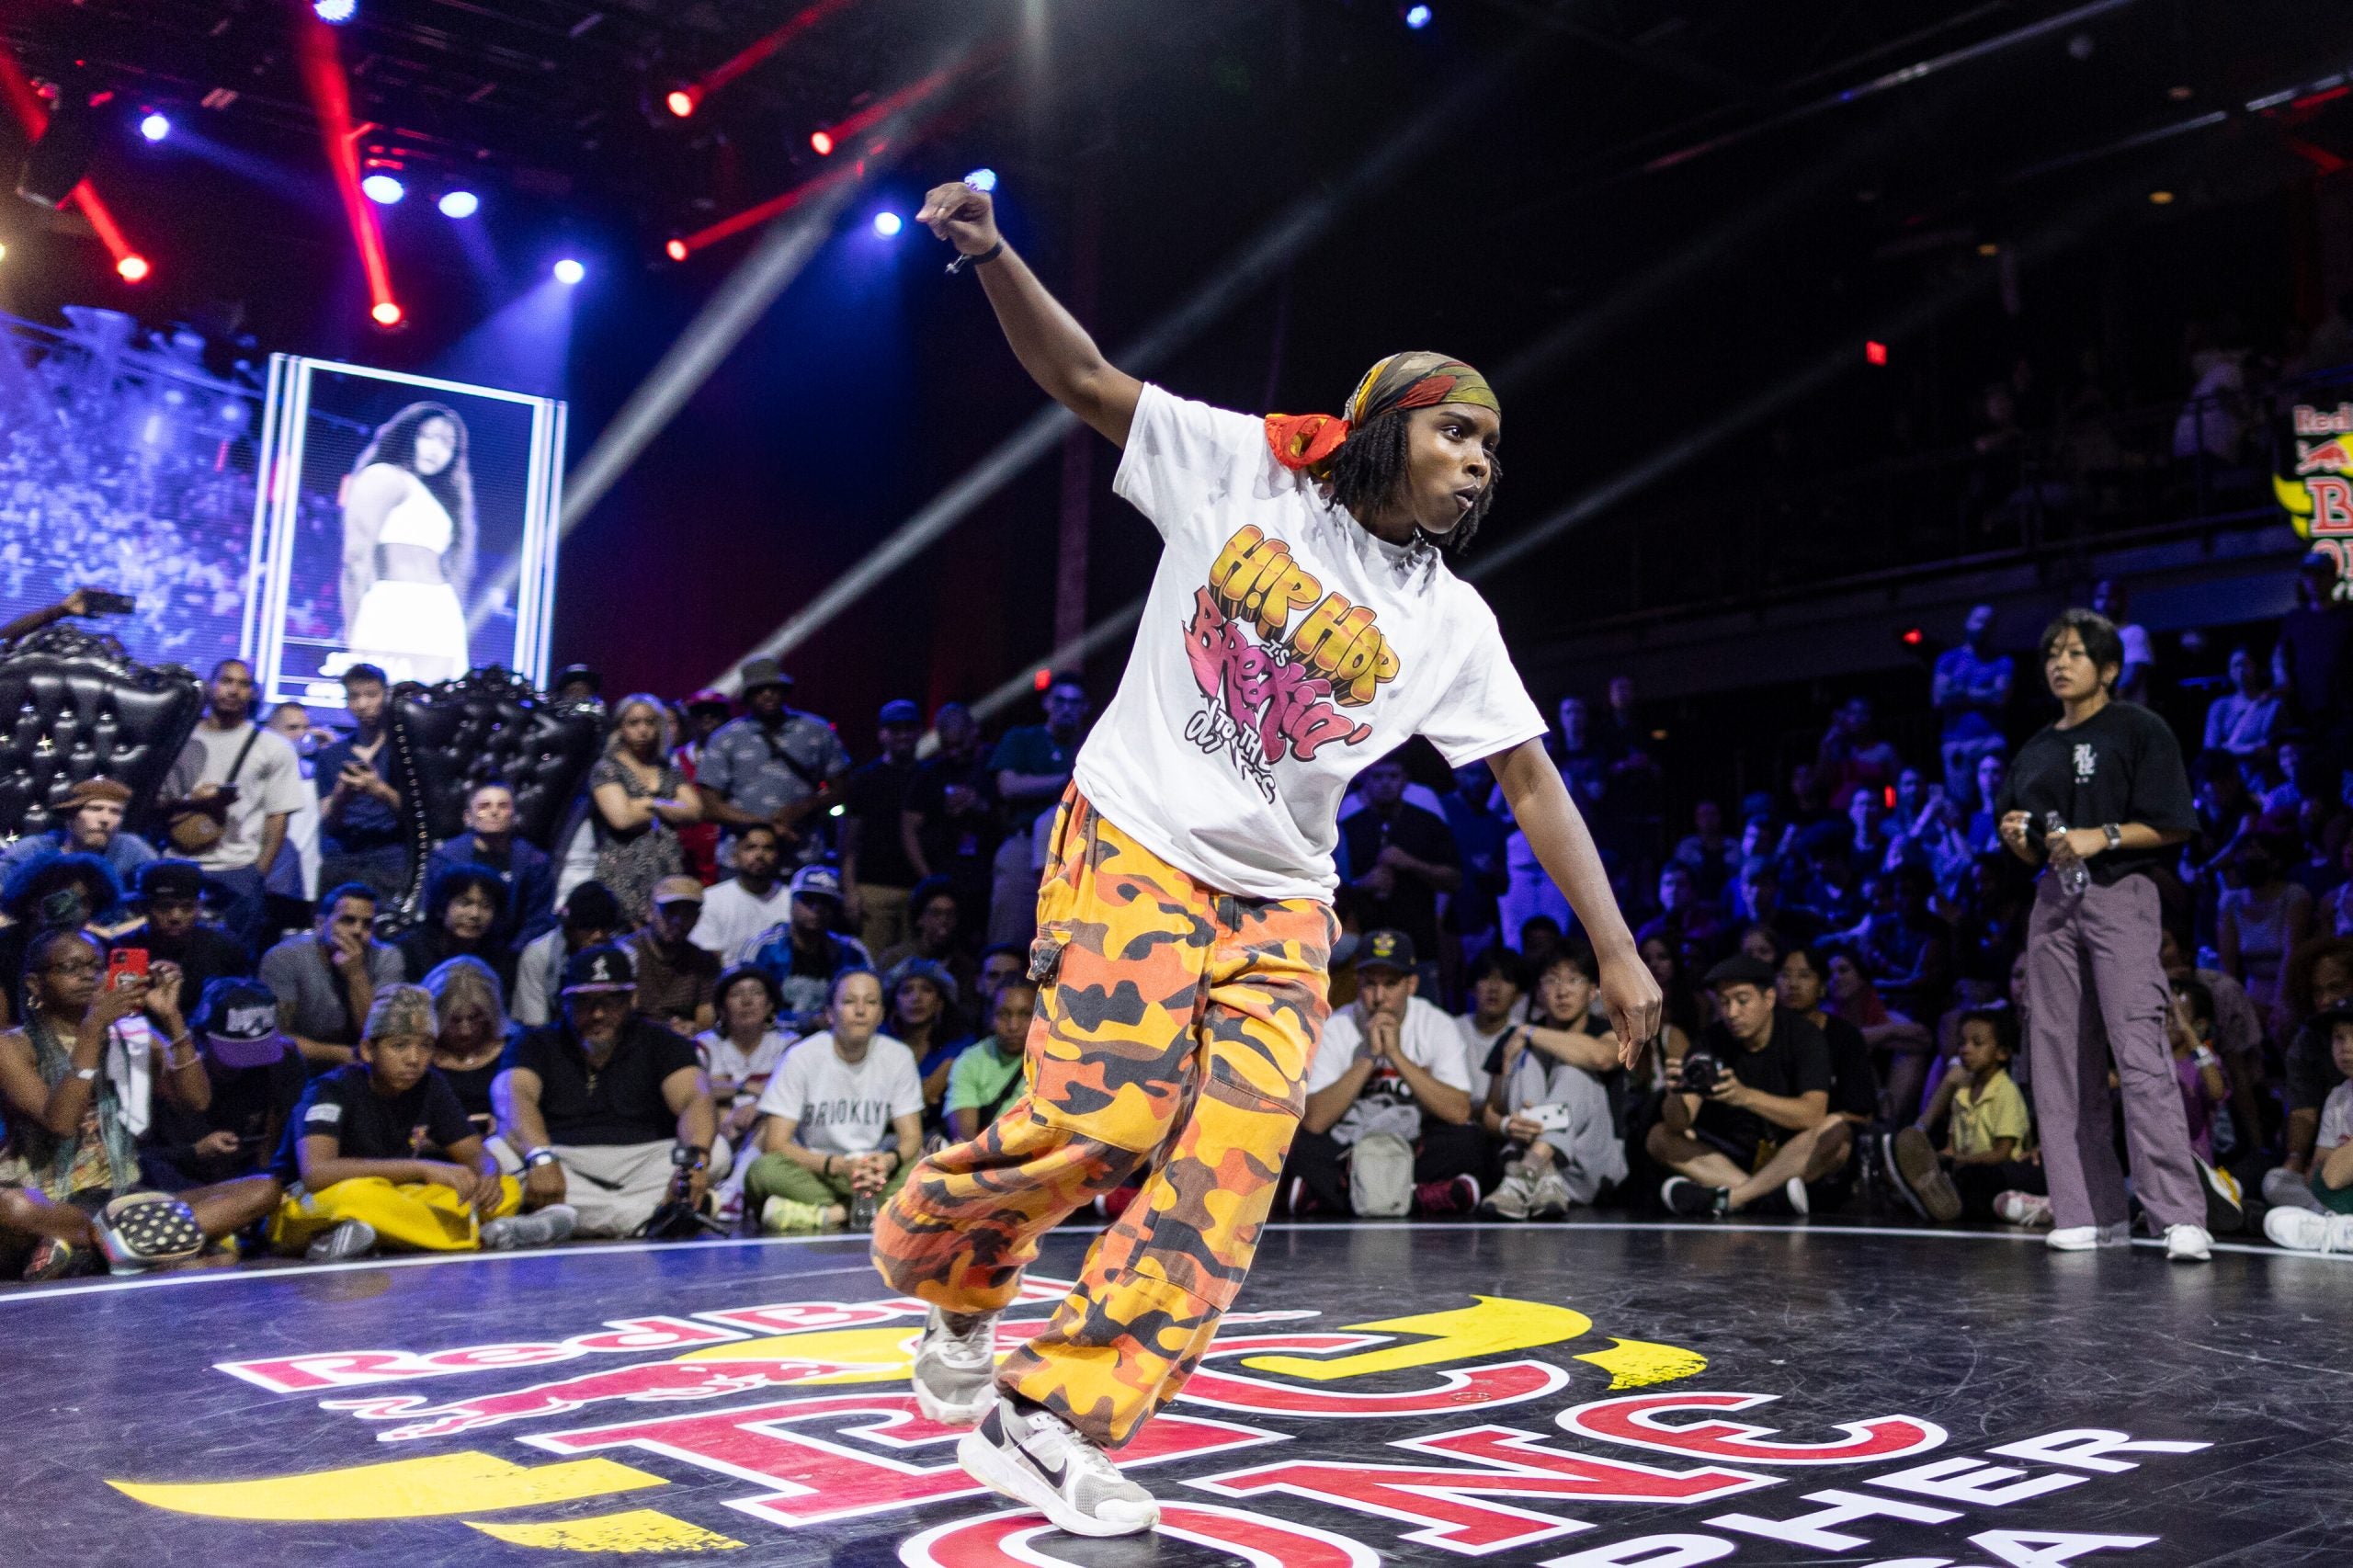 Red Bull Celebrates Hip-Hop’s 50th Anniversary With An Unforgettable Breaking Competition